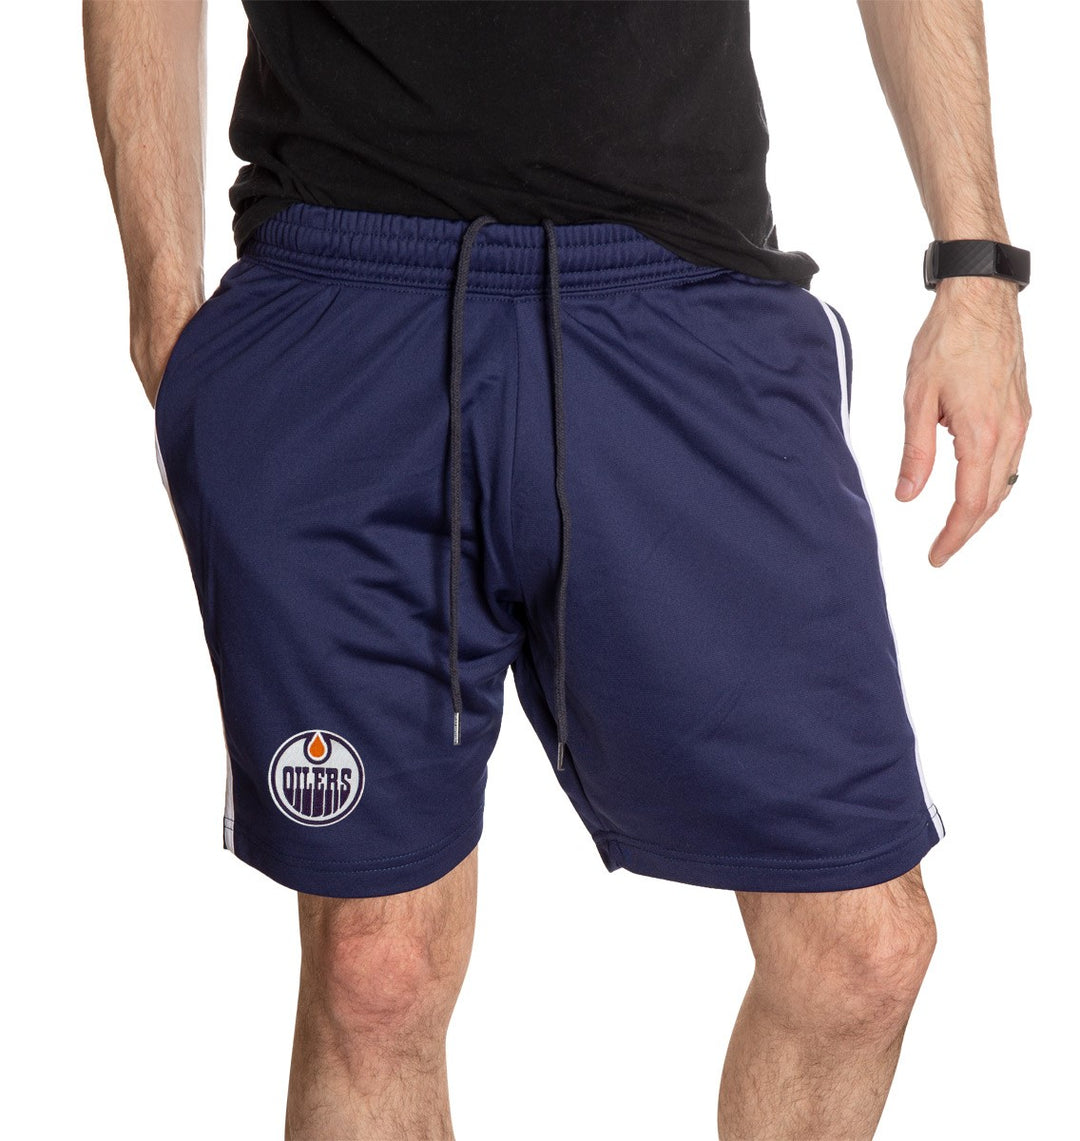 NHL Mens Official Team Two-Stripe Shorts- Edmonton Oilers Full Length Photo OF Man Wearing Shorts WIth Hand In Pocket